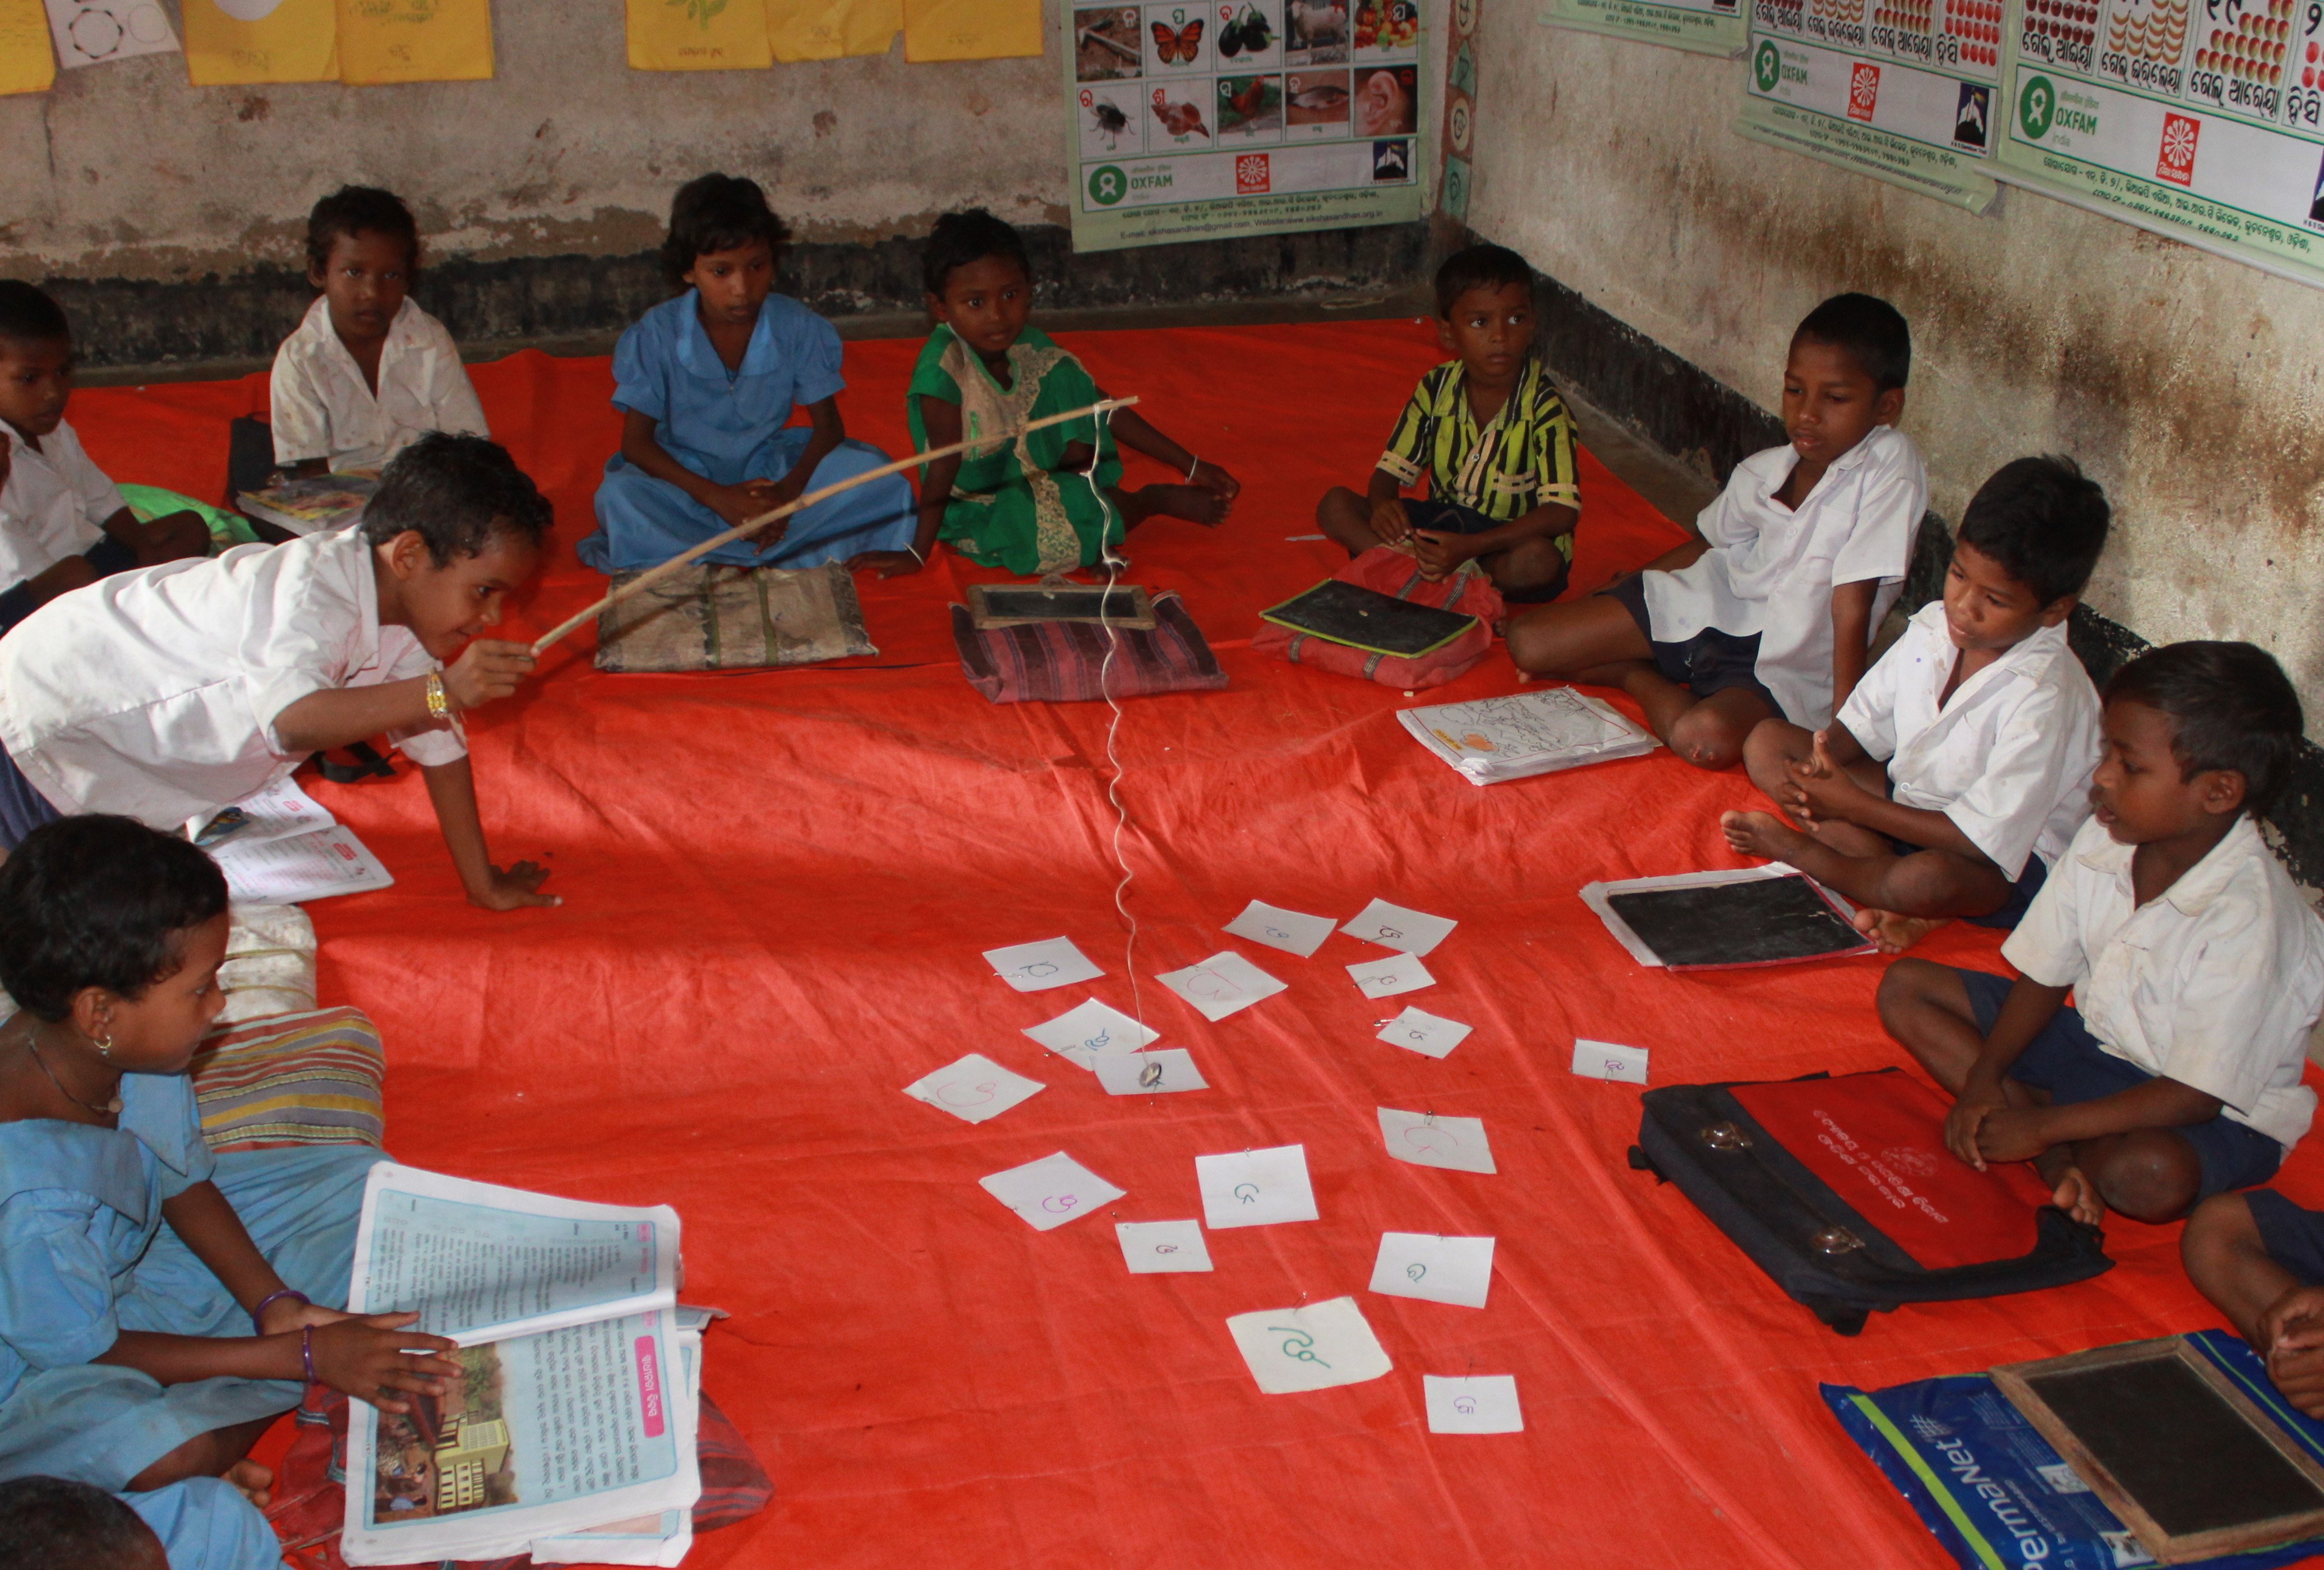 Children sitting in a circle on the floor in a classroom. One child is holding a stick and trying to pick up a letter in the Odia 'alphabet' as part of a game.